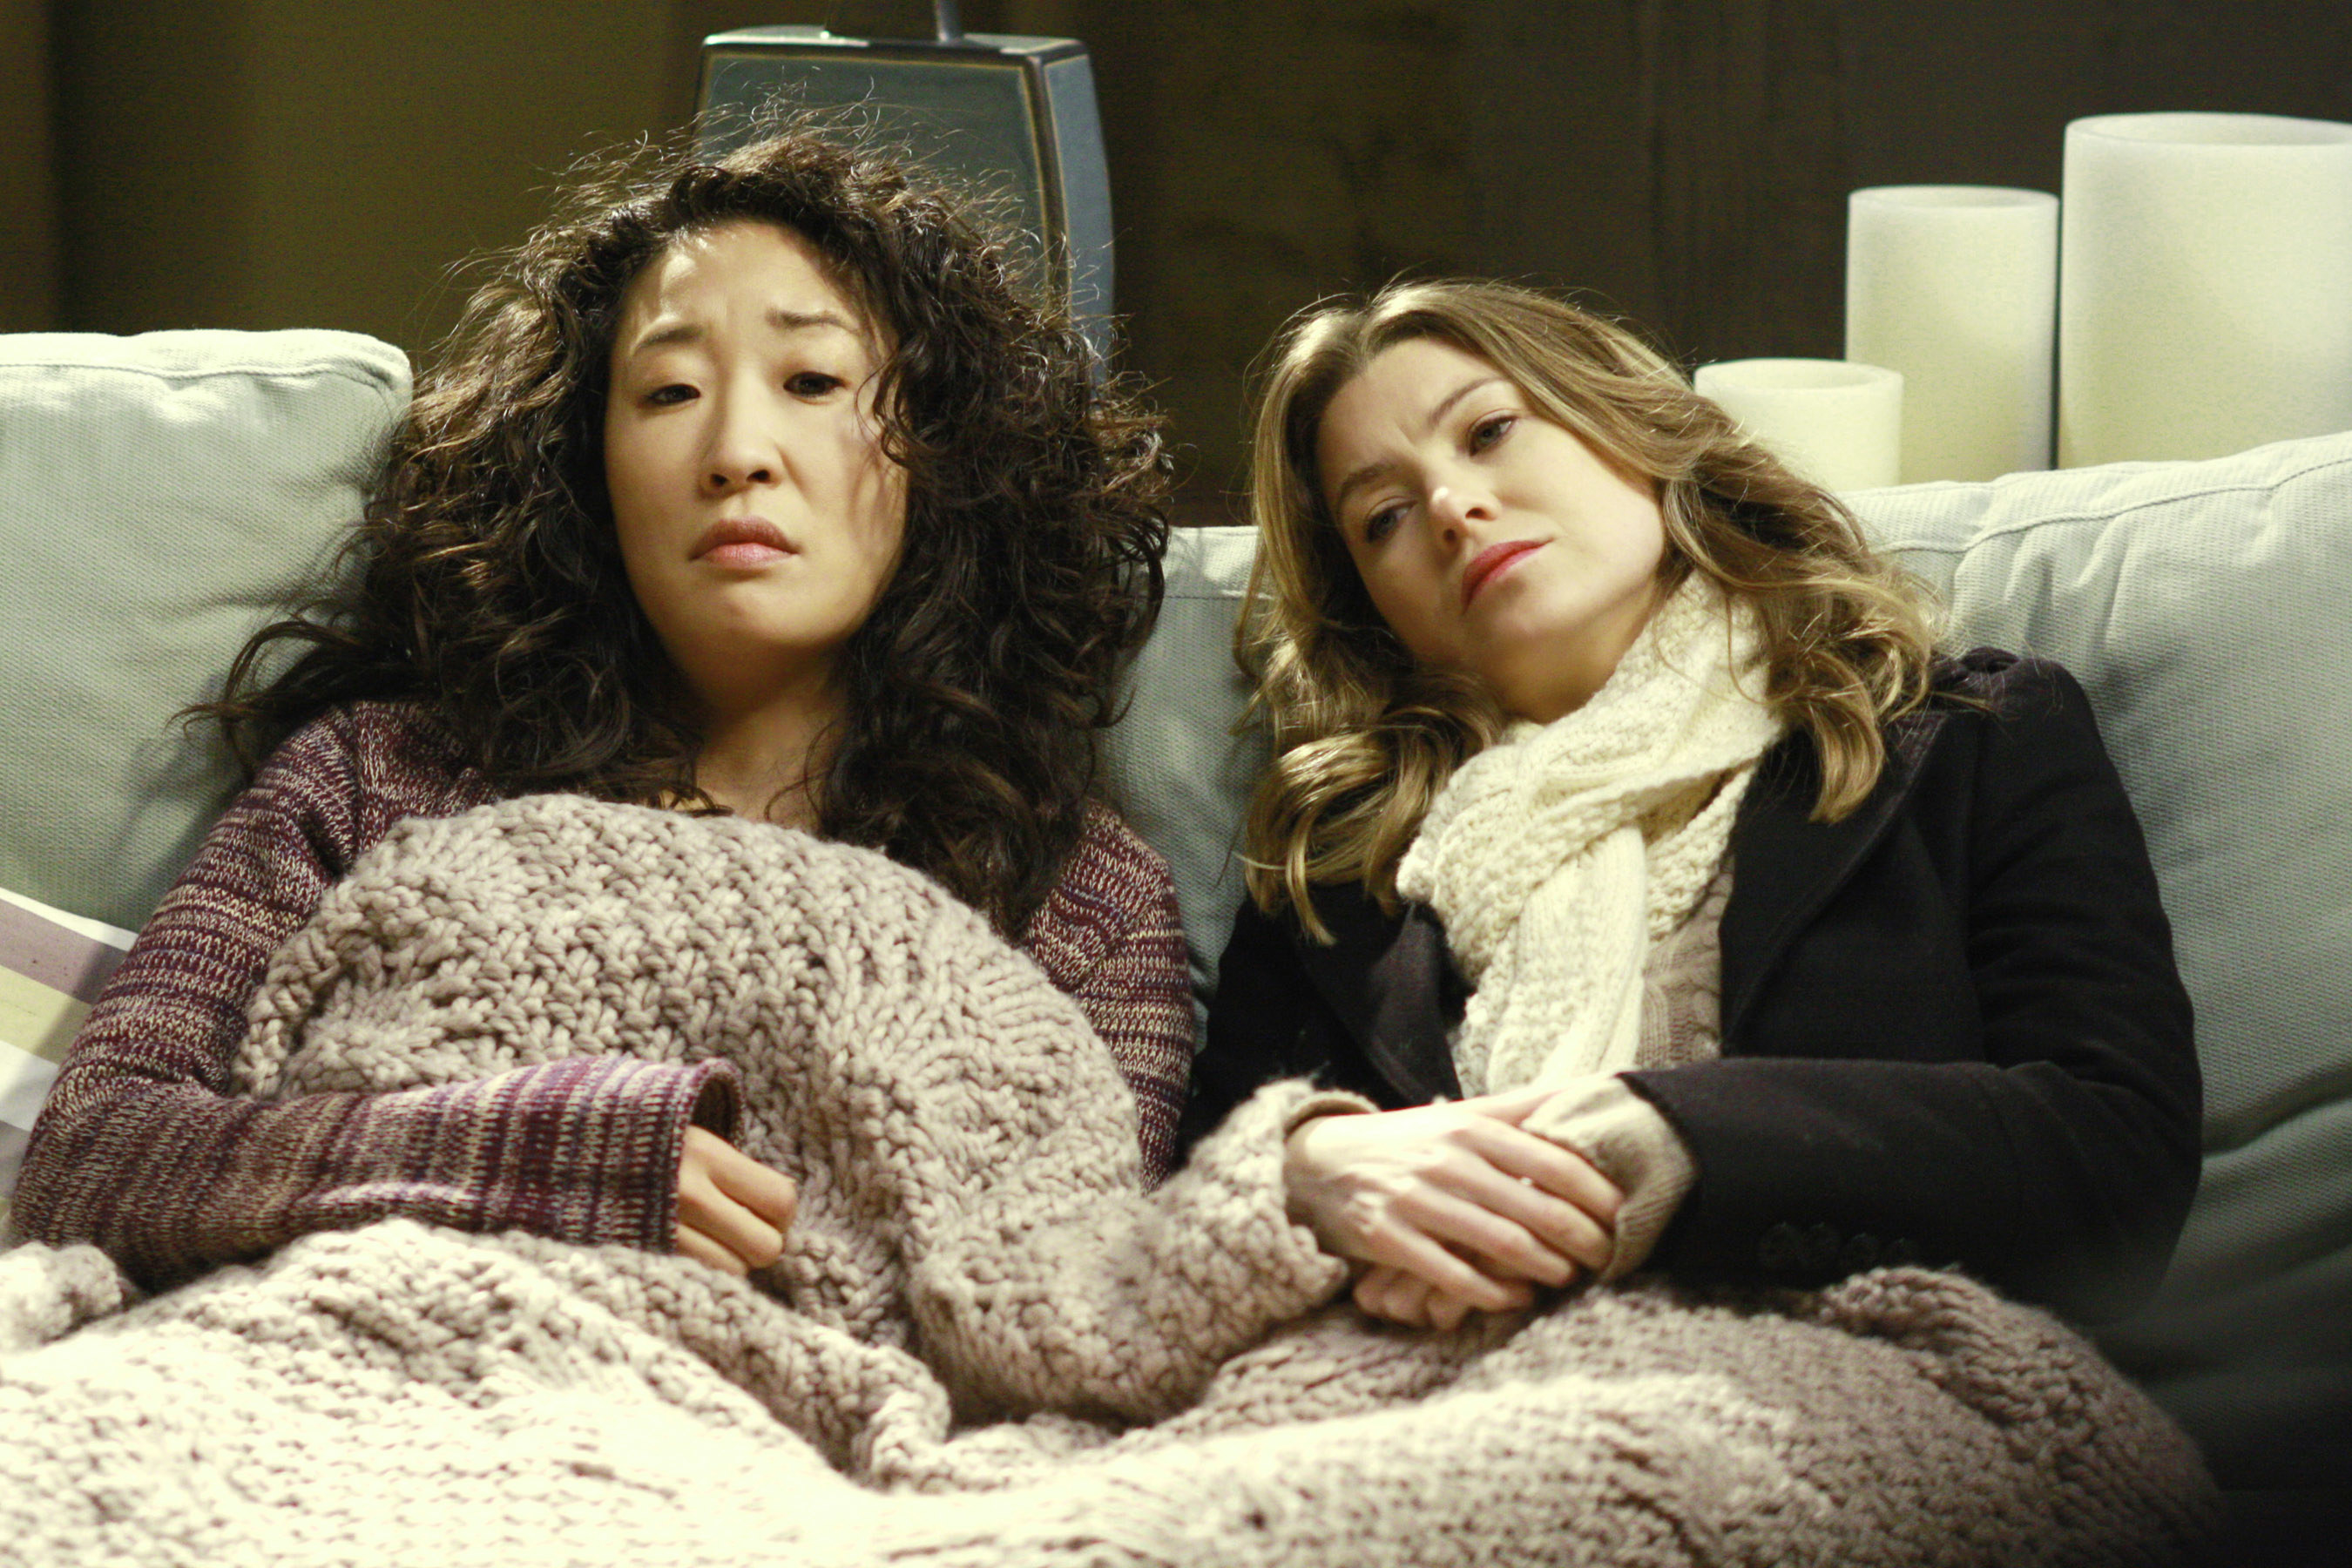 sandra oh in Greys anatomy sitting on the couch with a blanket with ellen pompeo